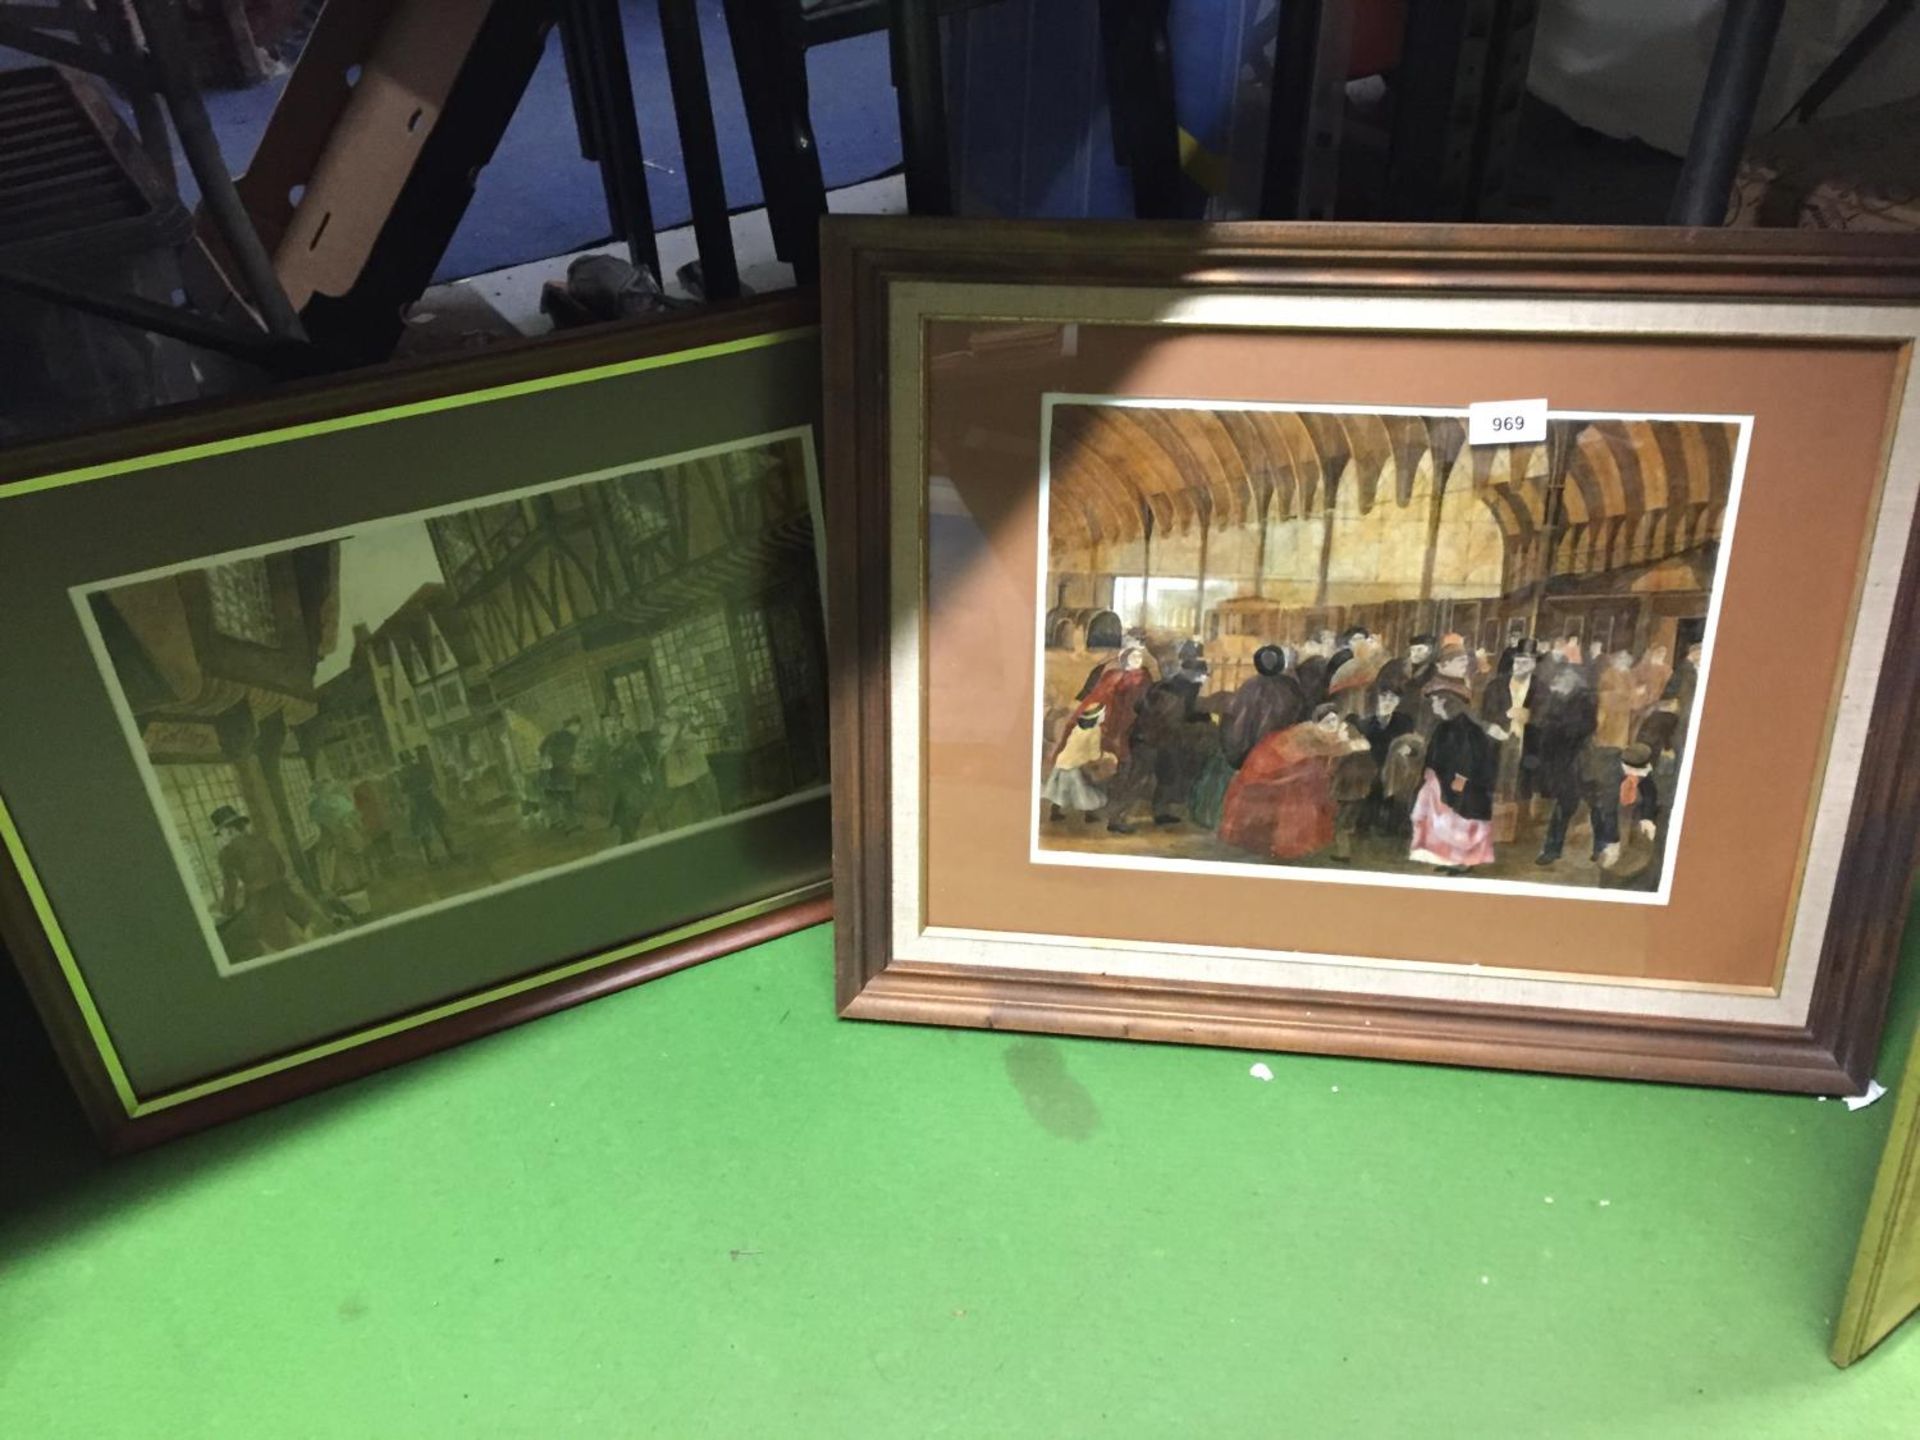 TWO FRAMED PRINTS OF A VINTAGE TOWN (CHESTER?)